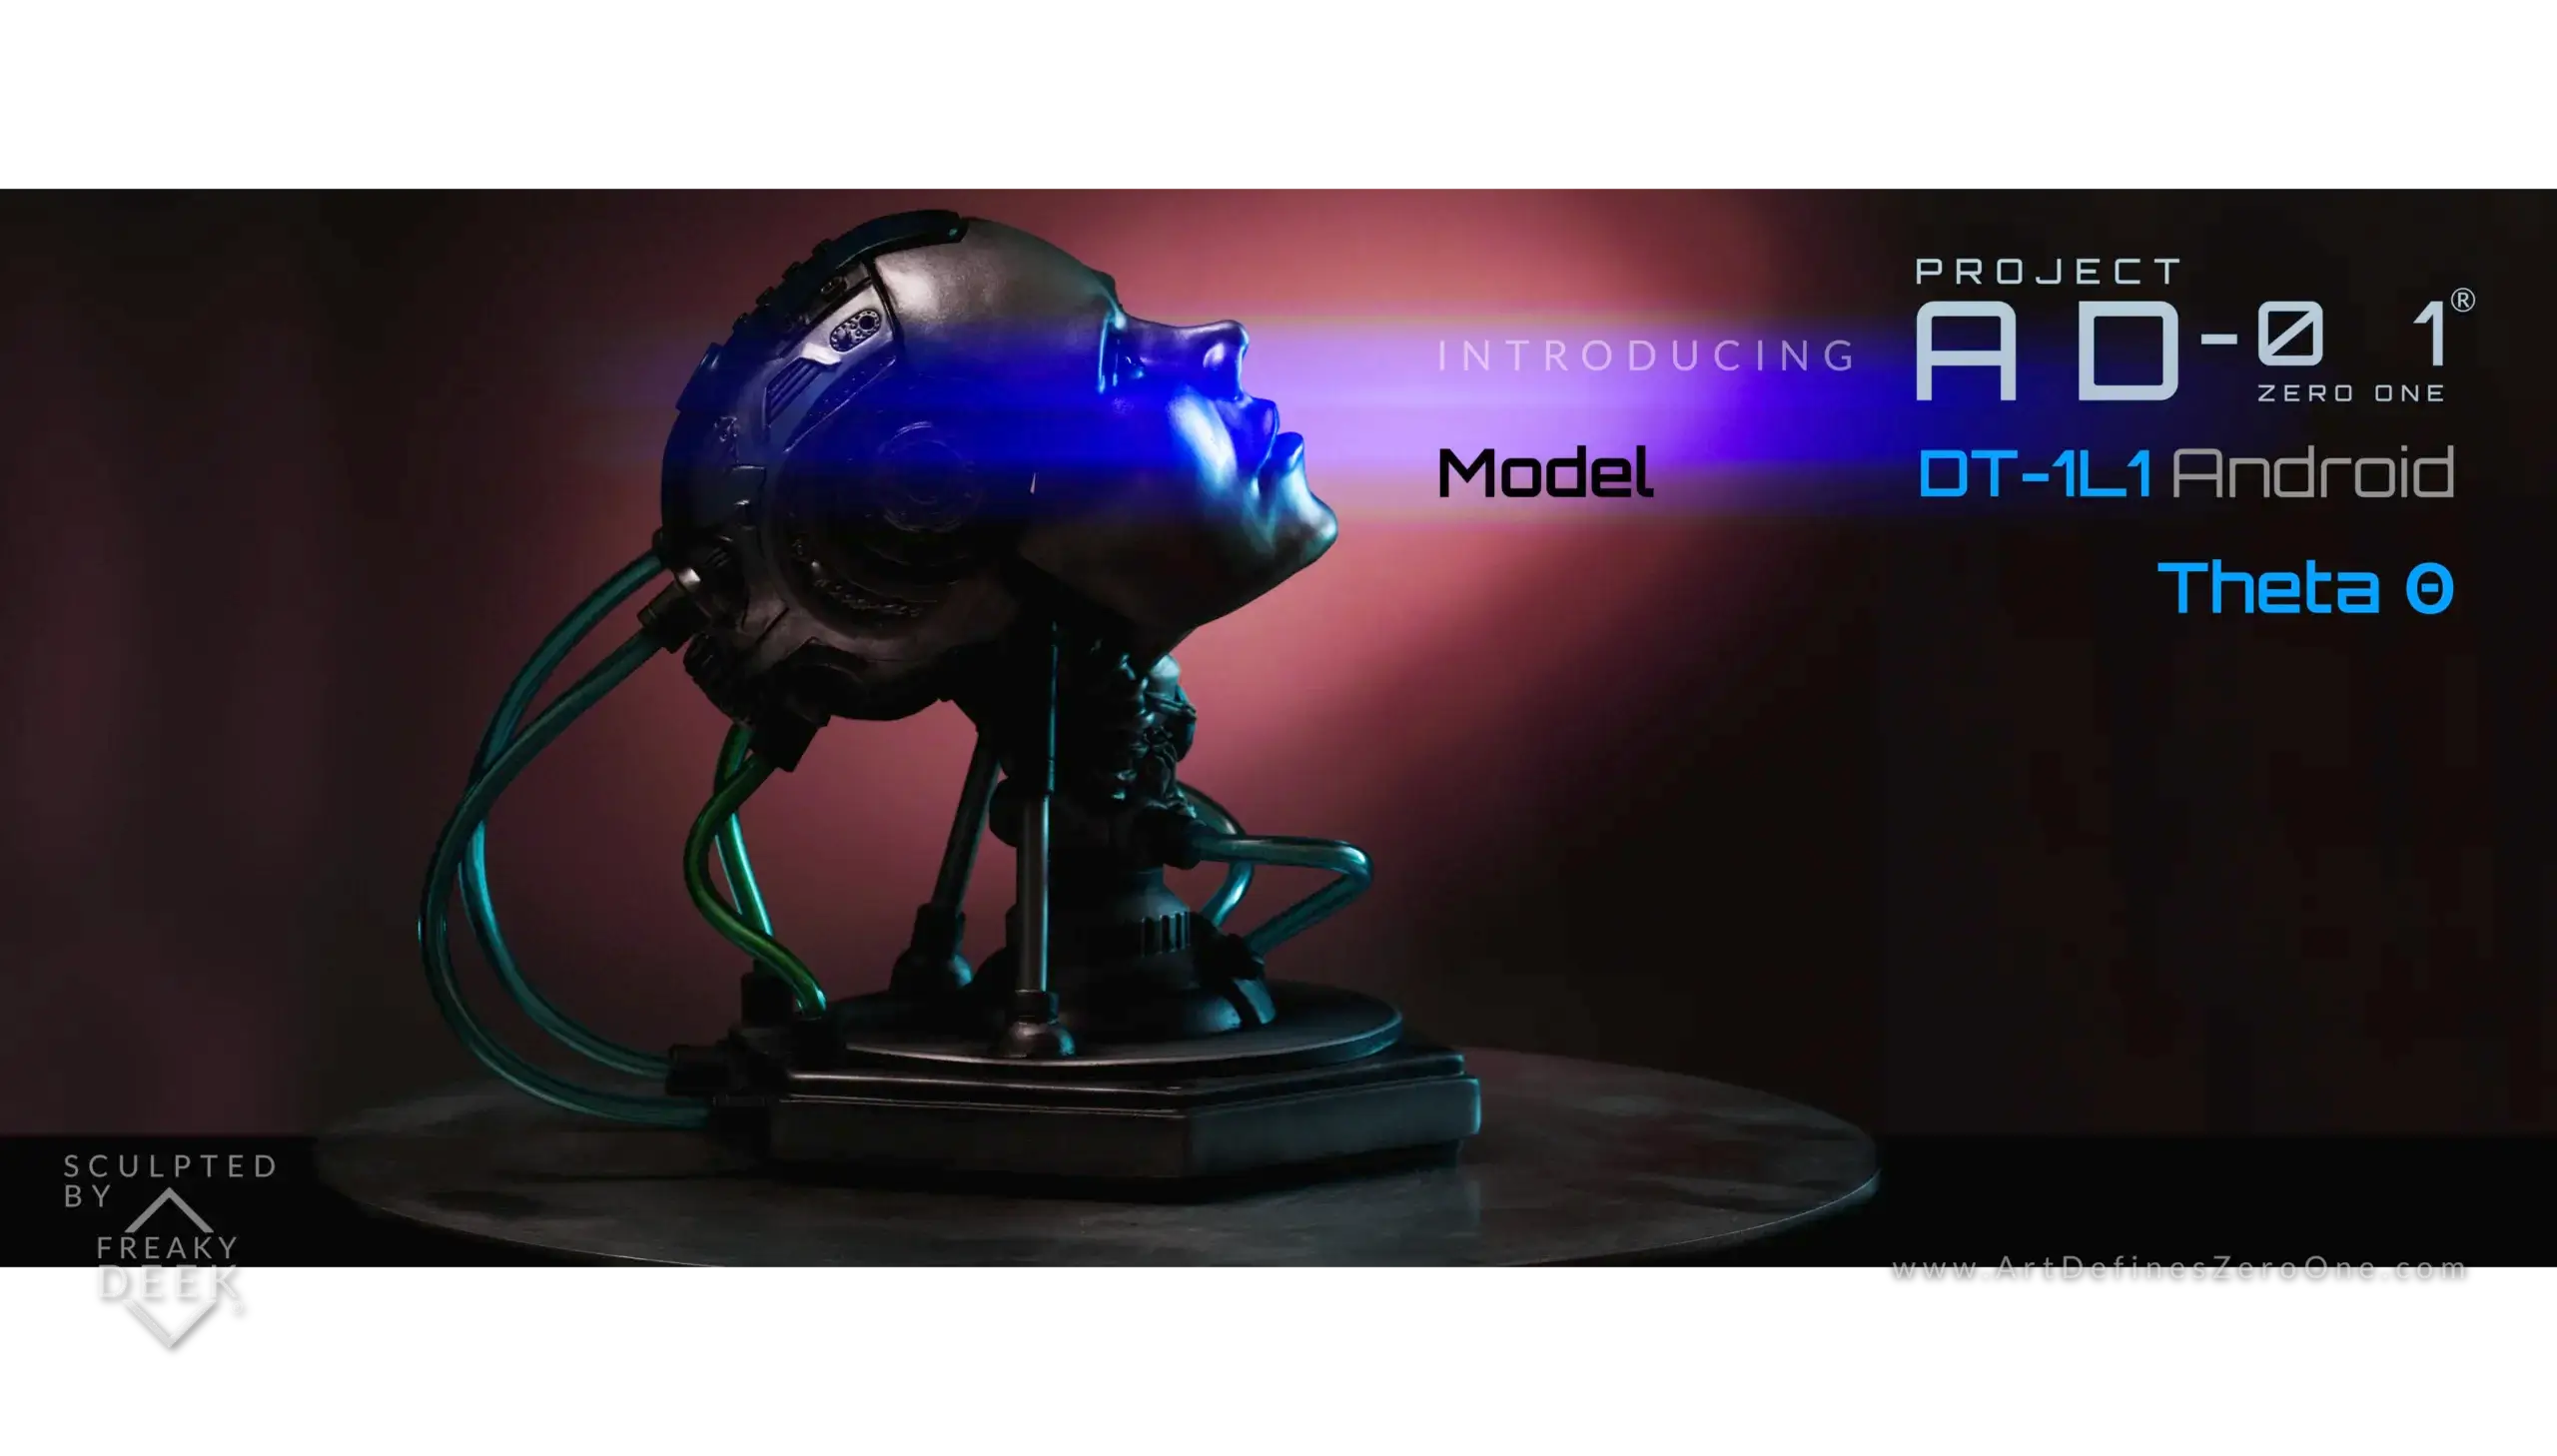 Project AD-01 handmade android blue sculpture Theta side view